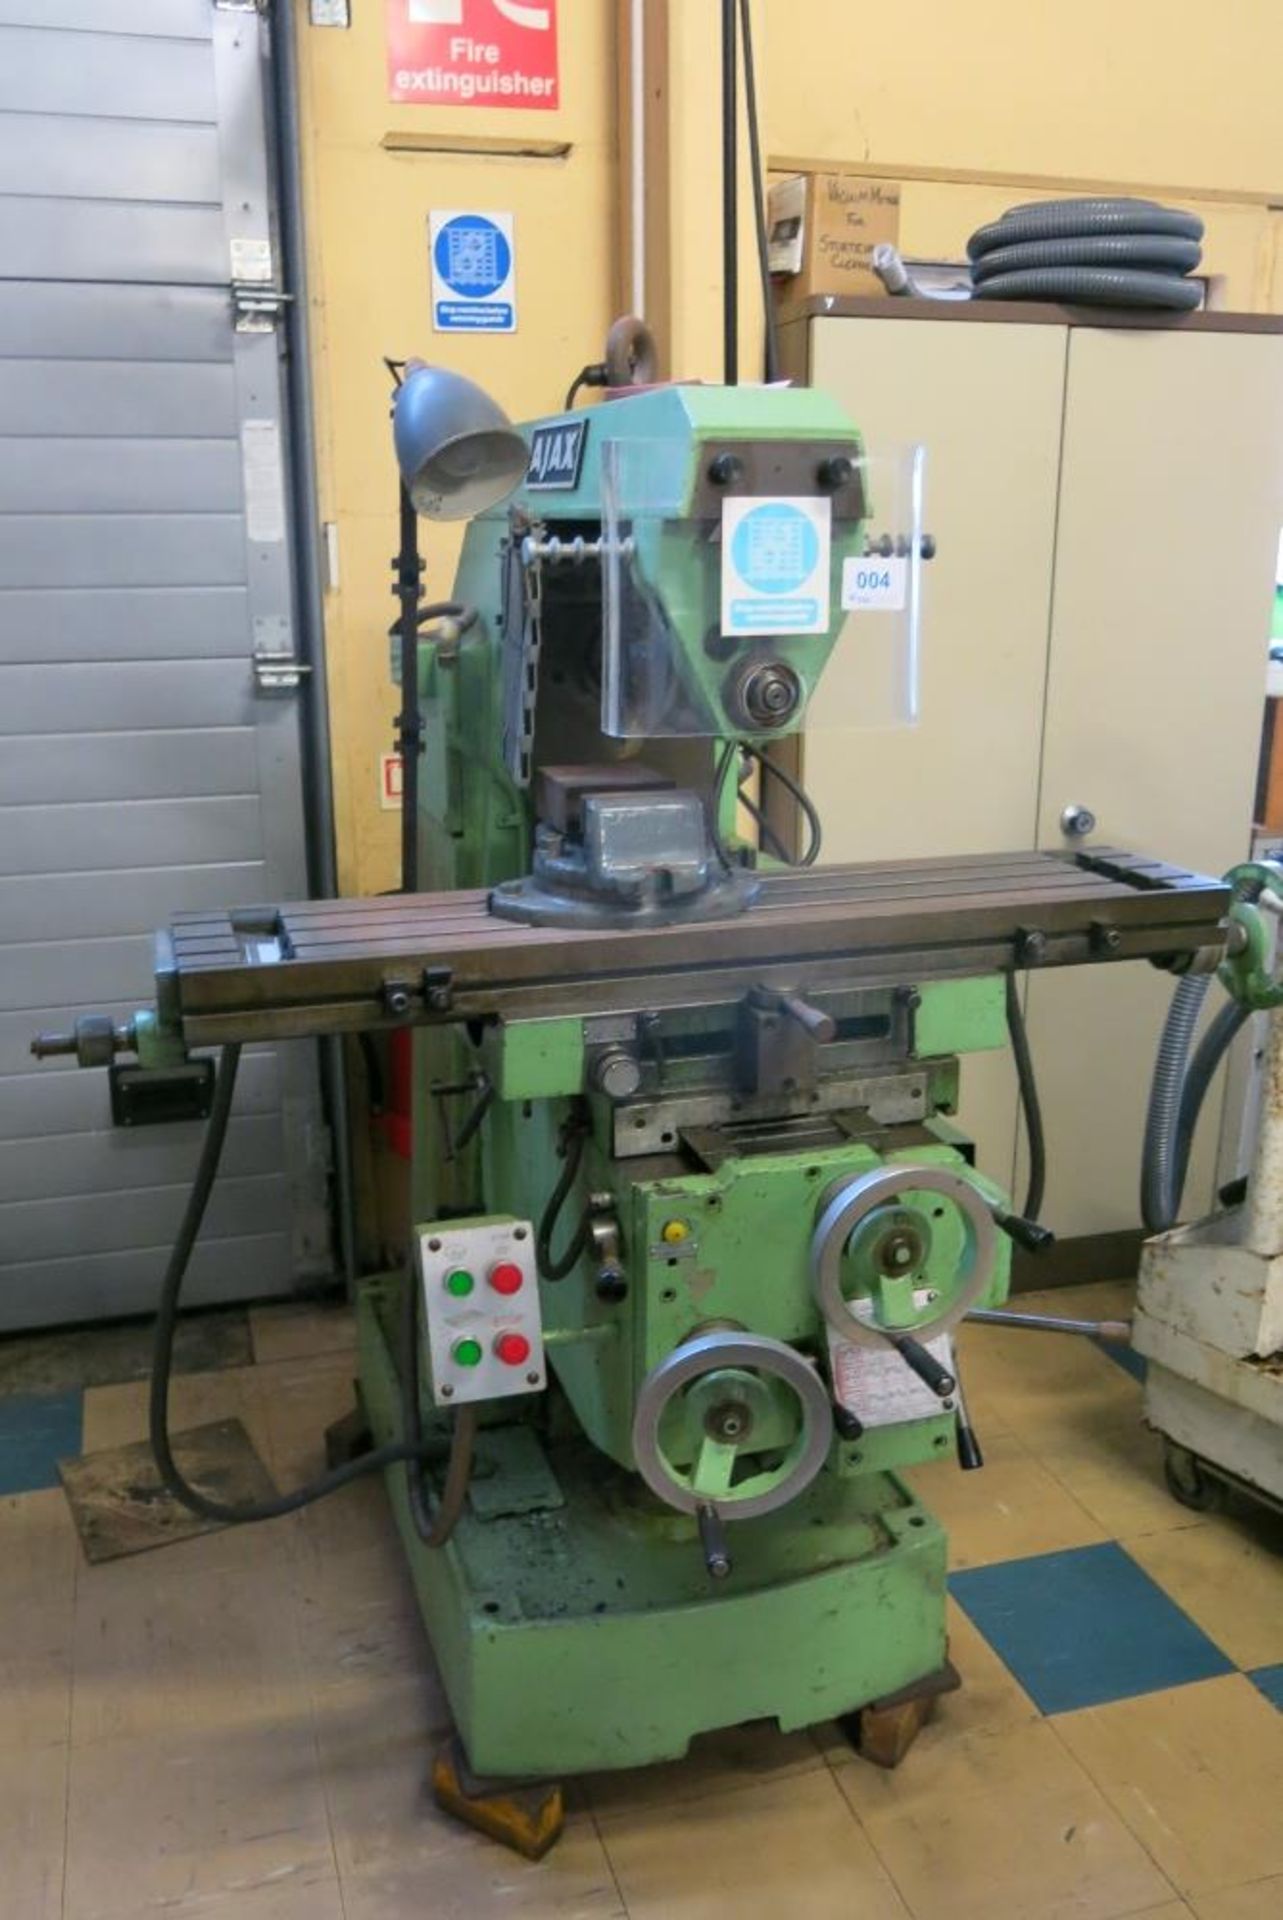 AJAX horizontal milling machine with cabinet and contents of cutters etc